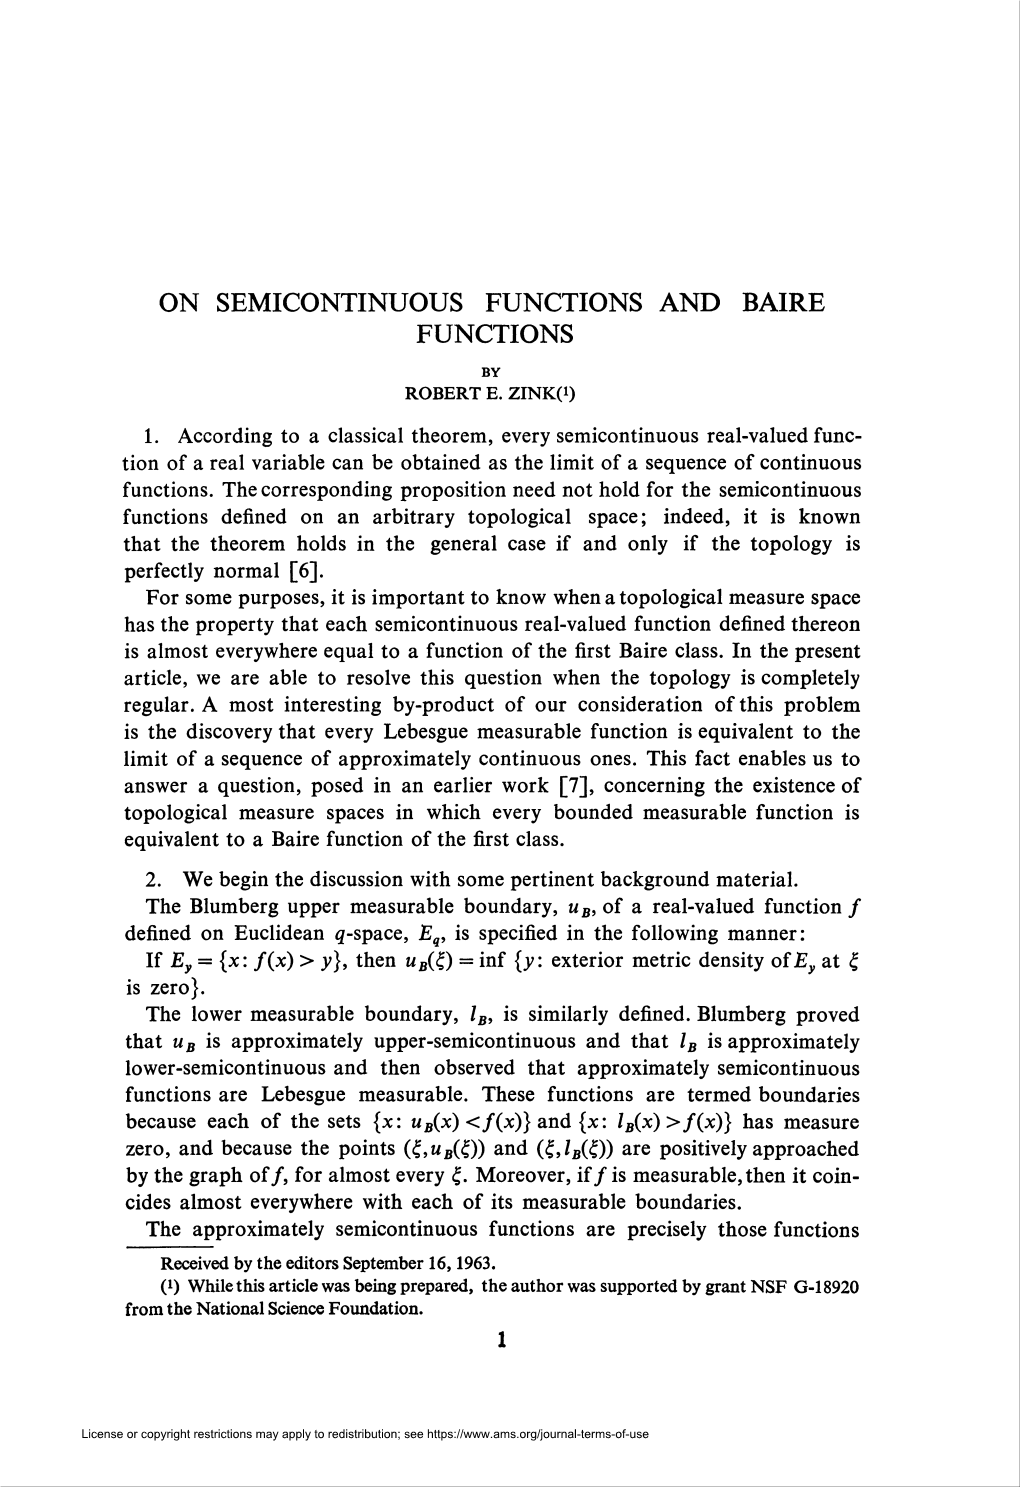 On Semicontinuous Functions and Baire Functions